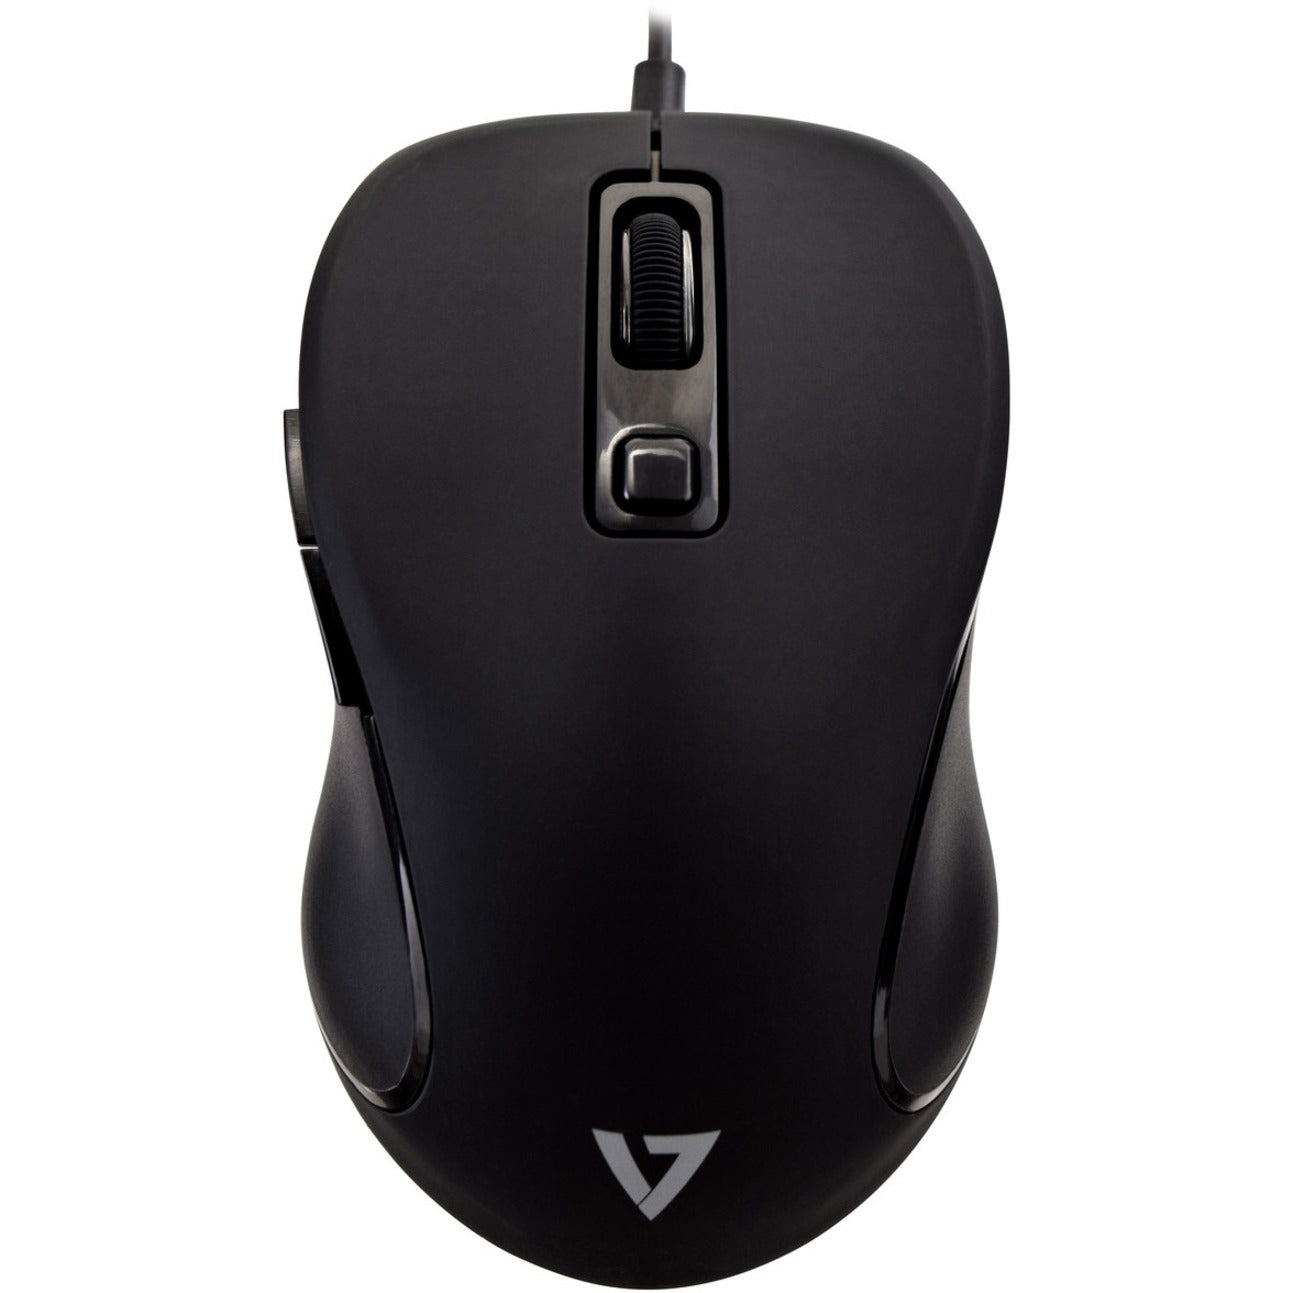 V7 MU300 PRO USB 6-Button Wired Mouse with Adjustable DPI - Black, Ergonomic Fit, 1600 DPI, 2-Year Warranty [Discontinued]